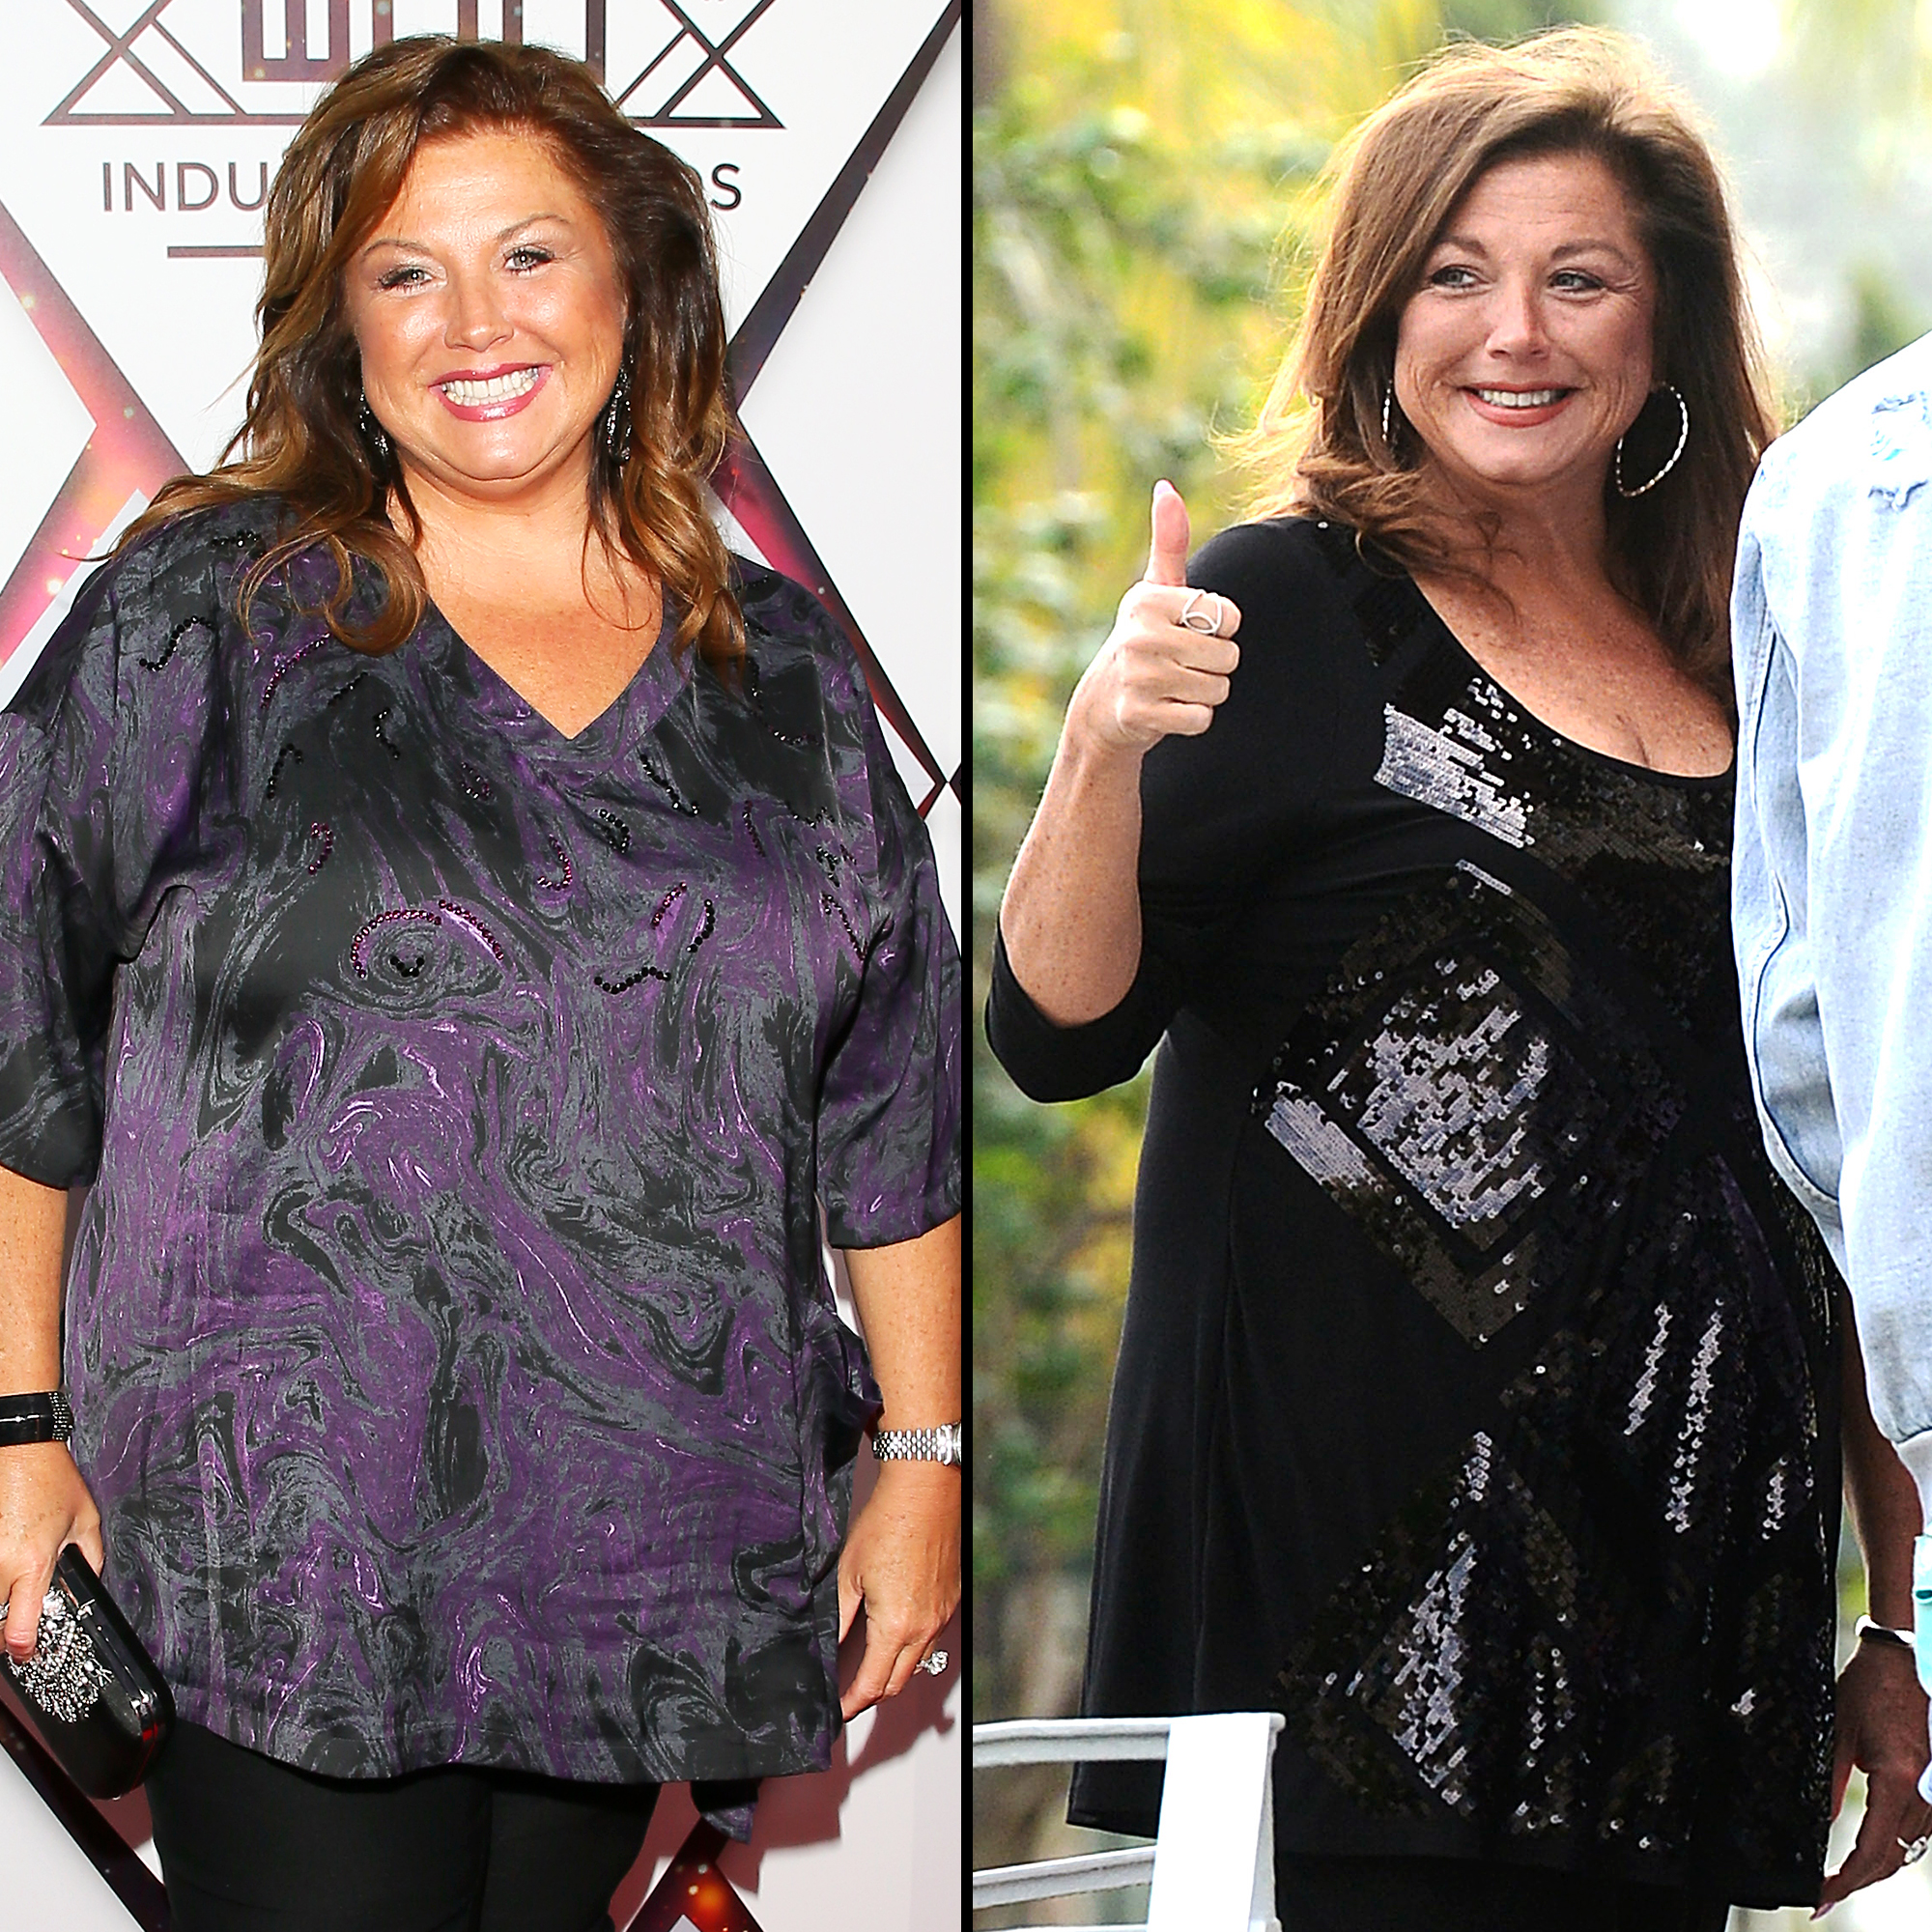 Abby Lee Miller Reveals Weight Loss at Easter Church Service